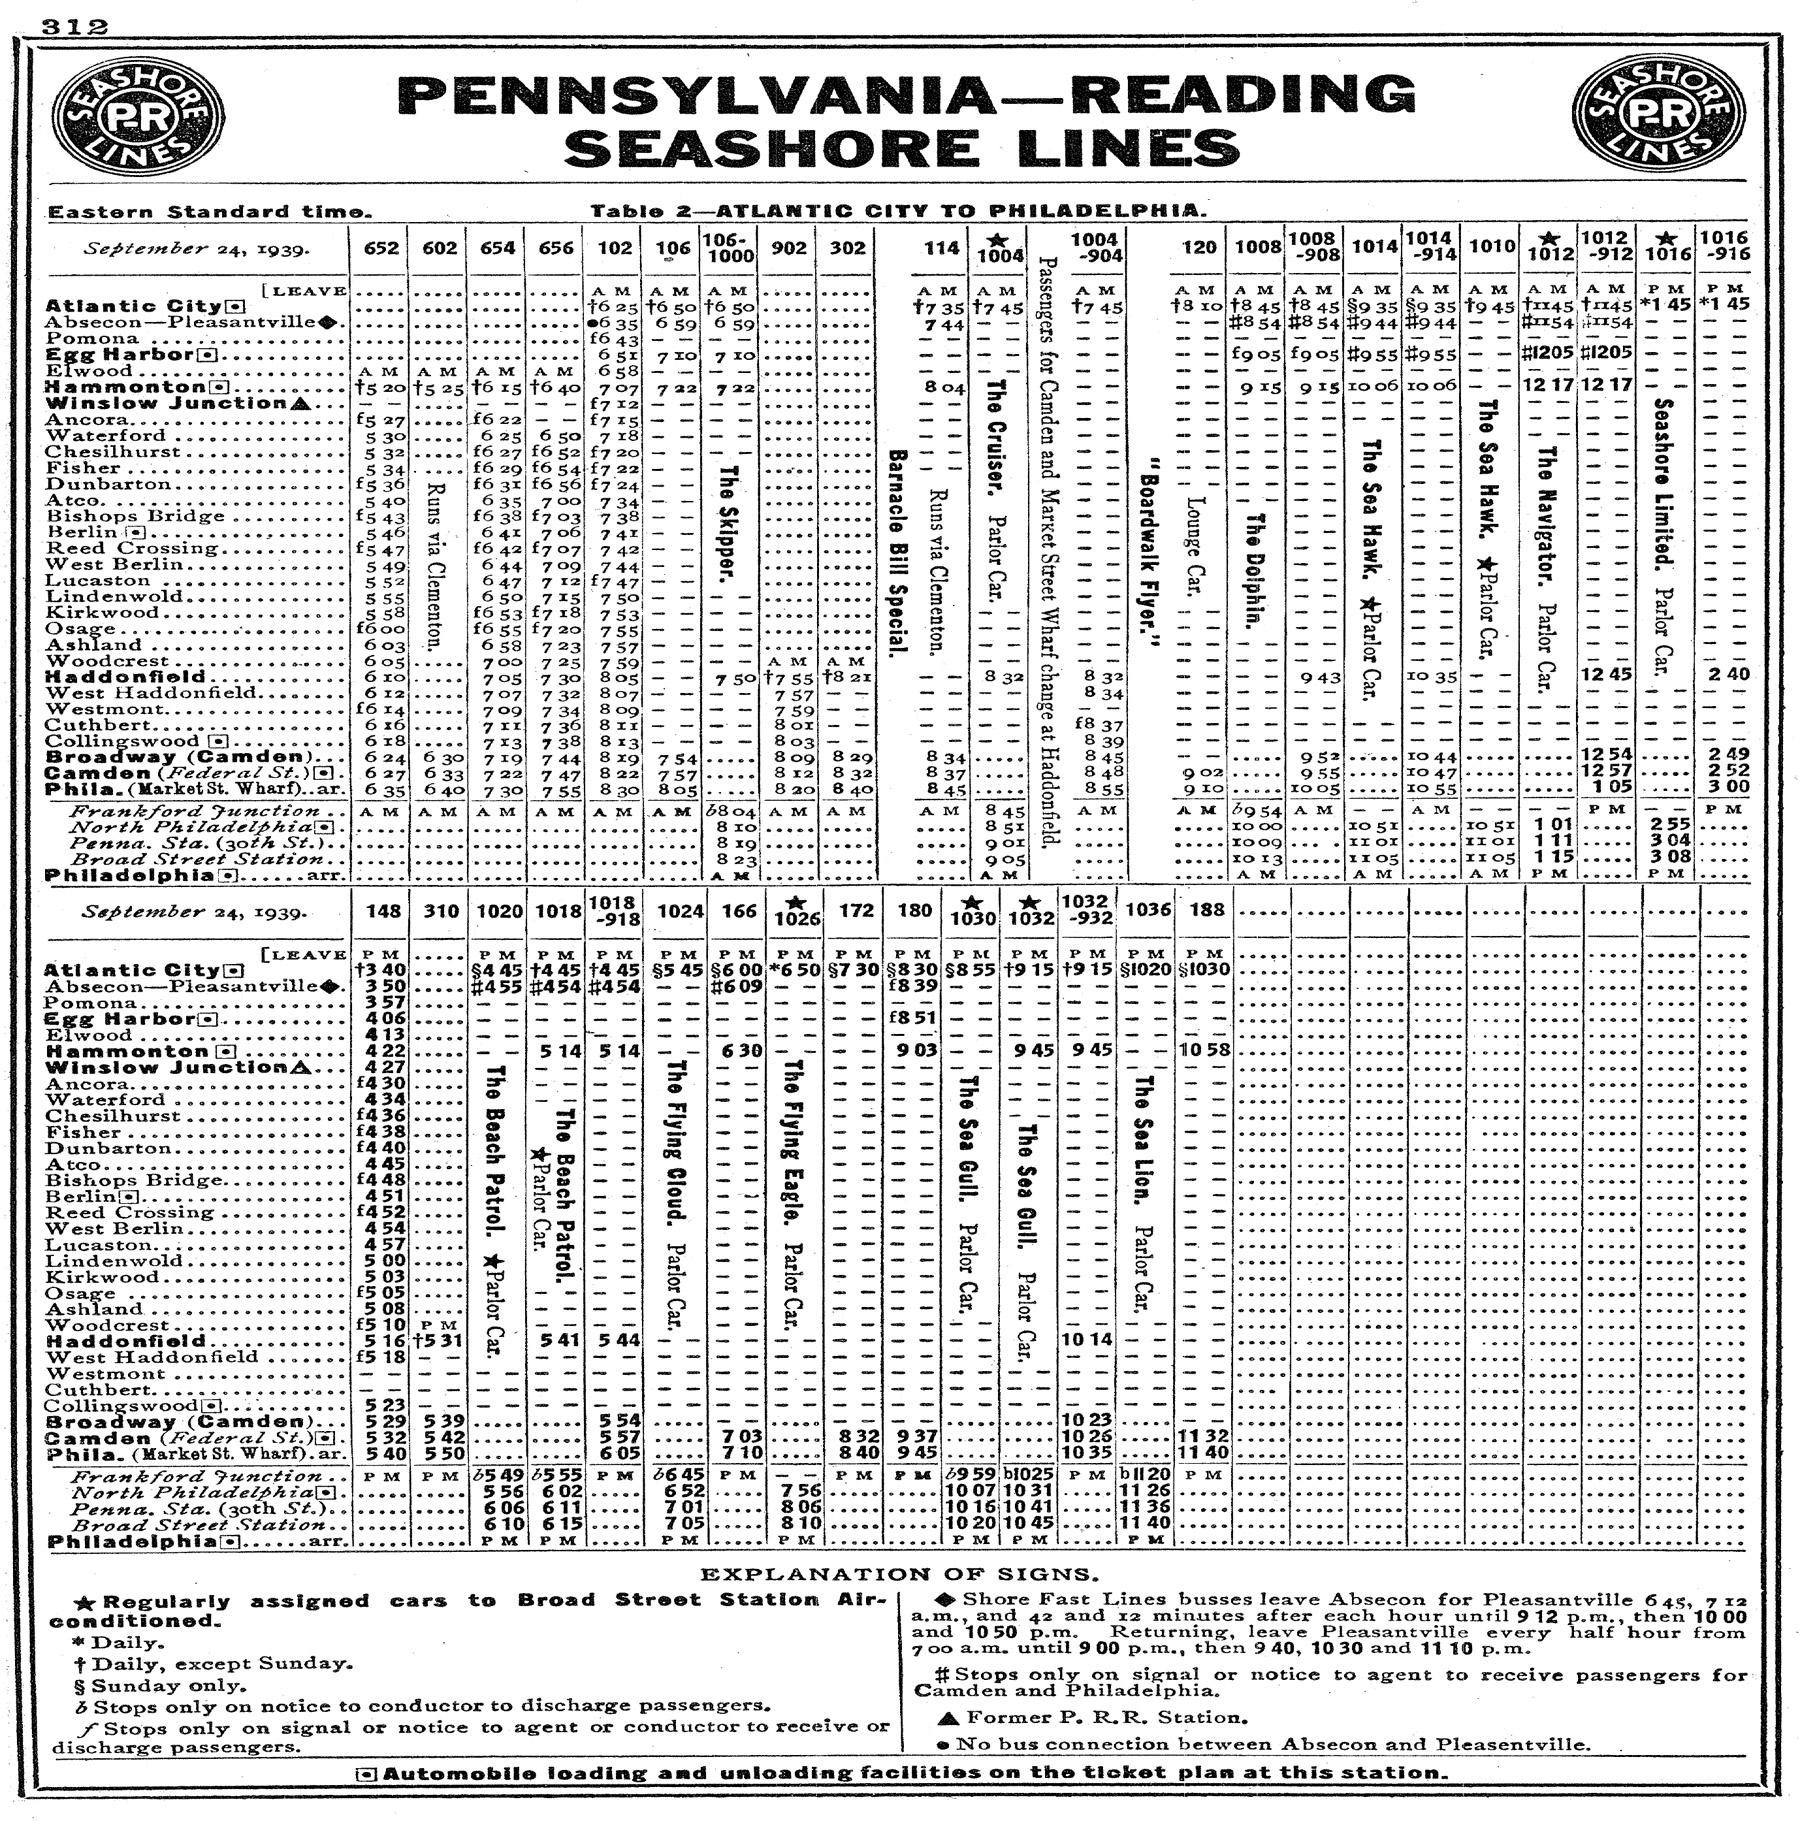 PENNSYLVANIA READING SEASHORE LINES in southern New Jersey - NEW BOOK 